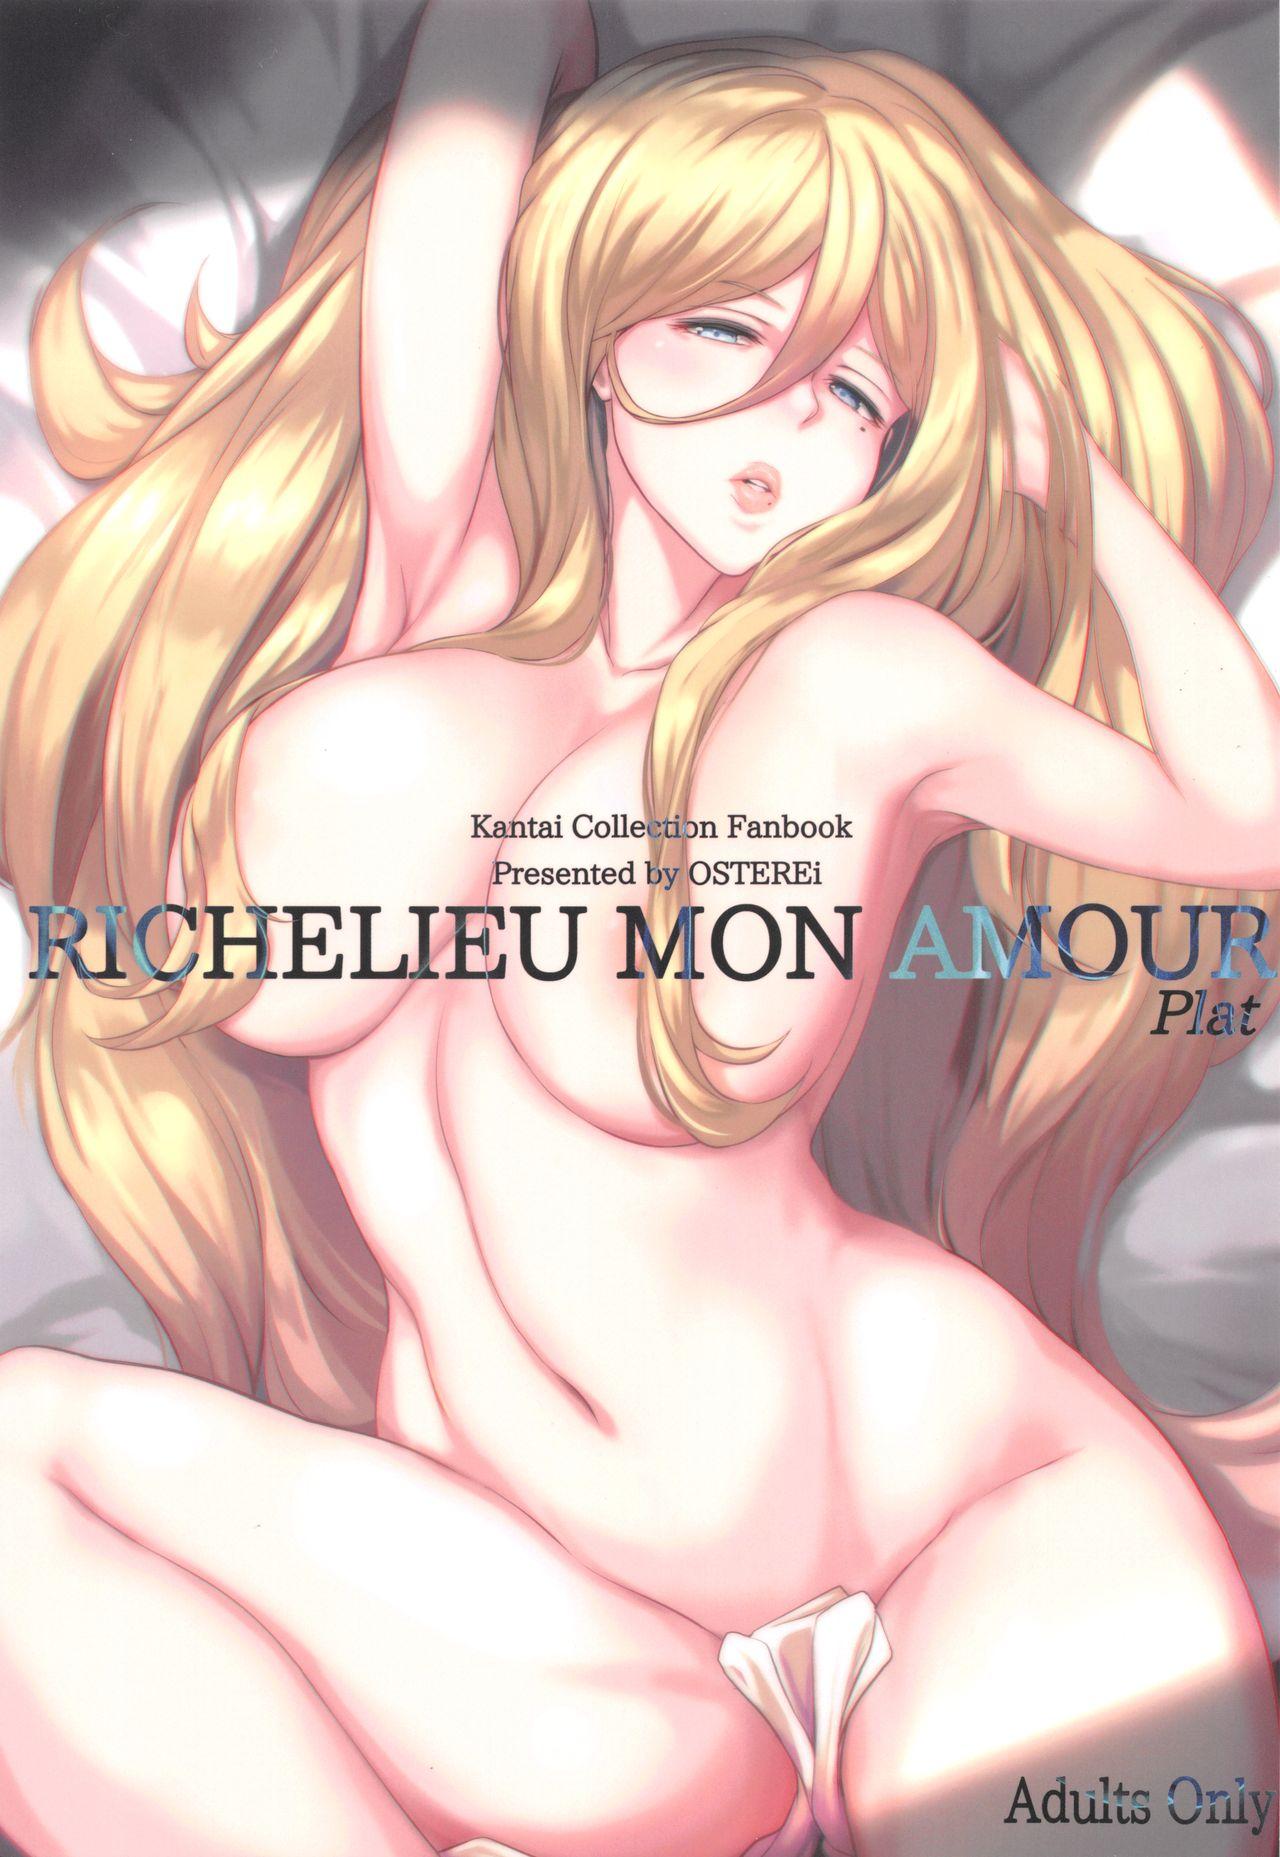 Speculum RICHELIEU MON AMOUR Plat - Kantai collection Hunks - Picture 1